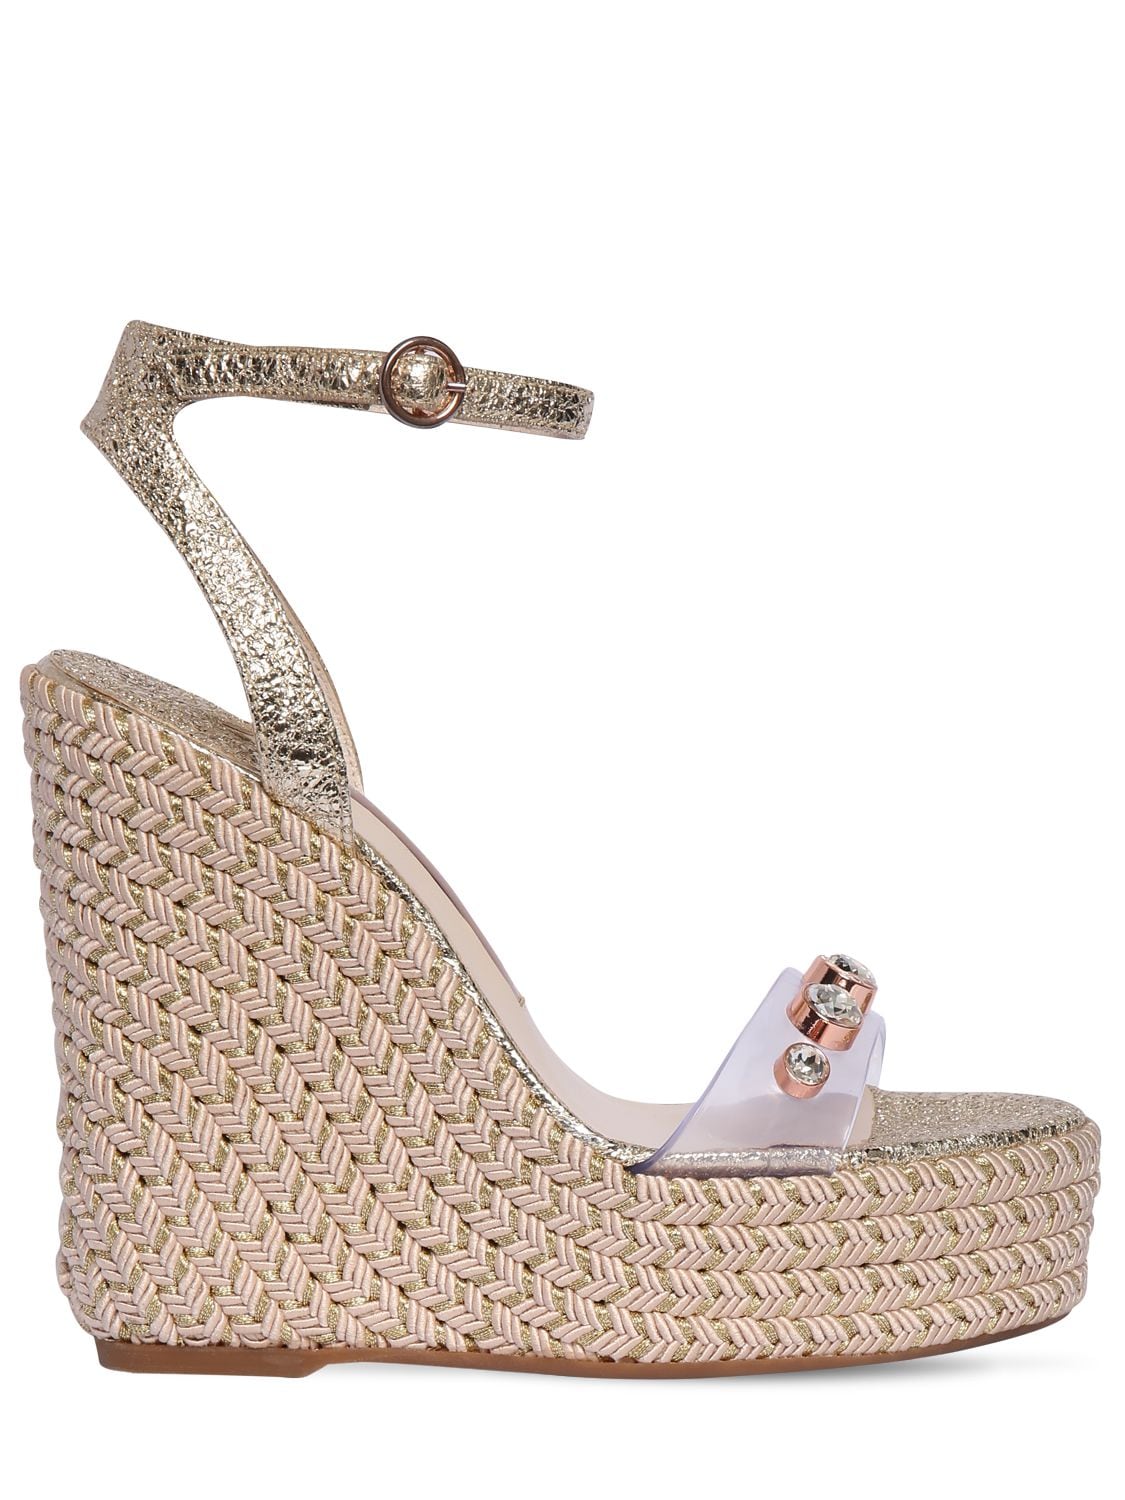 Sophia Webster 140mm Dina Plexi & Leather Wedges In Gold